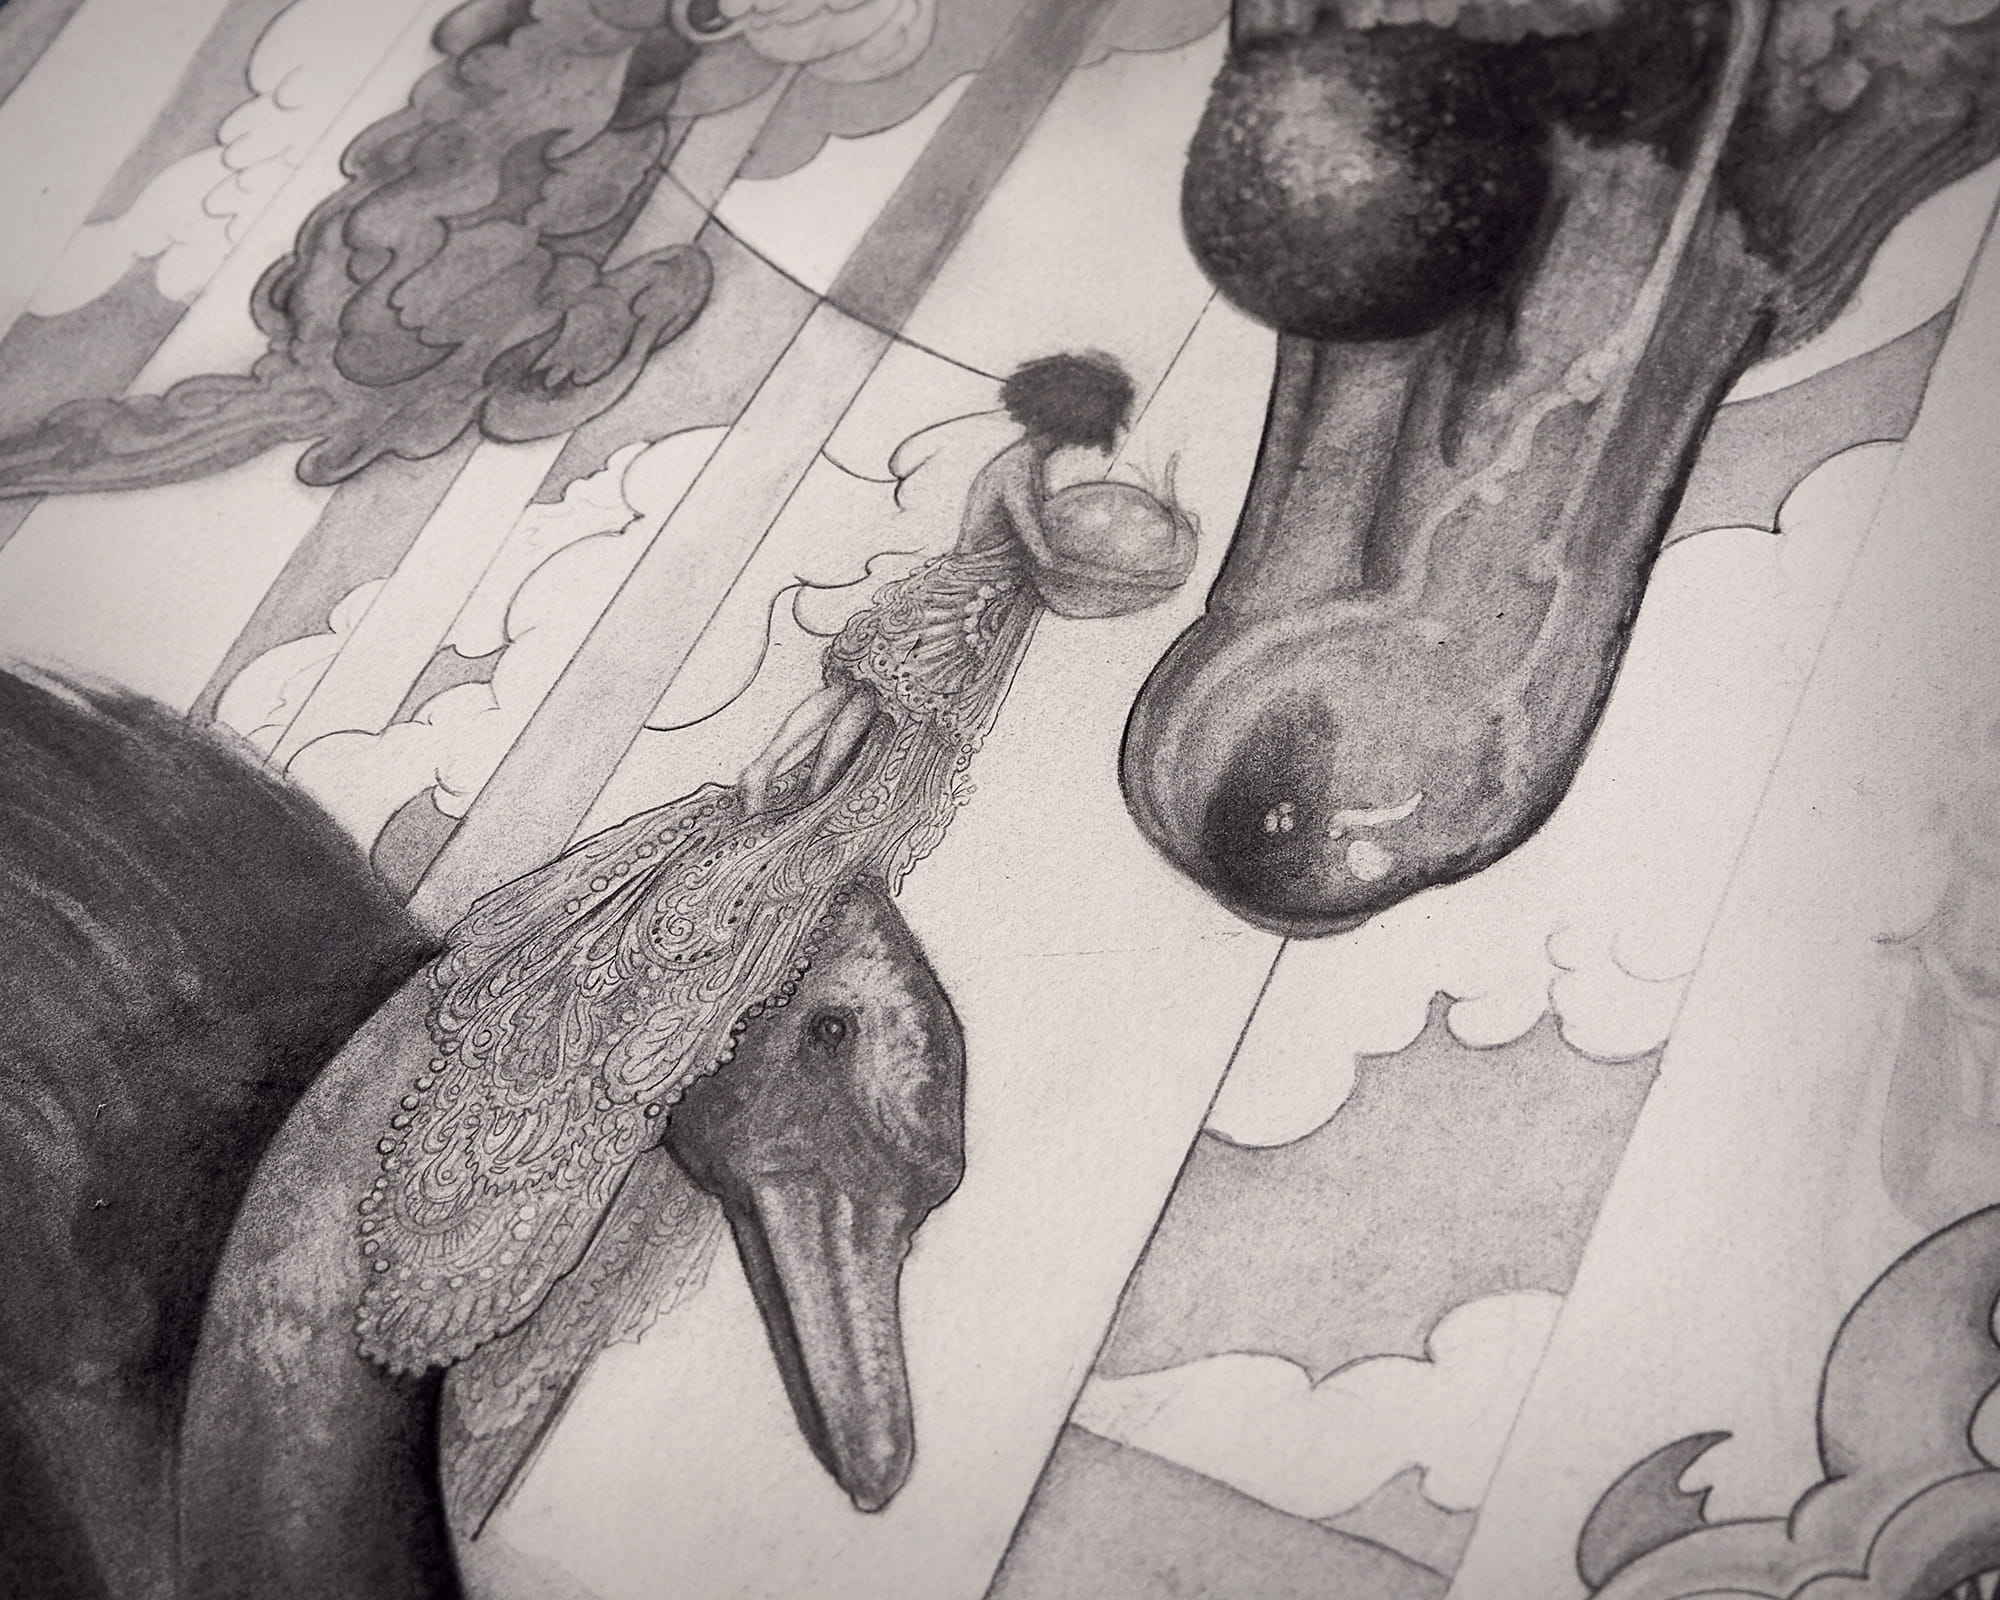 Graphite sketch of the girl and the peach and the giant swan.